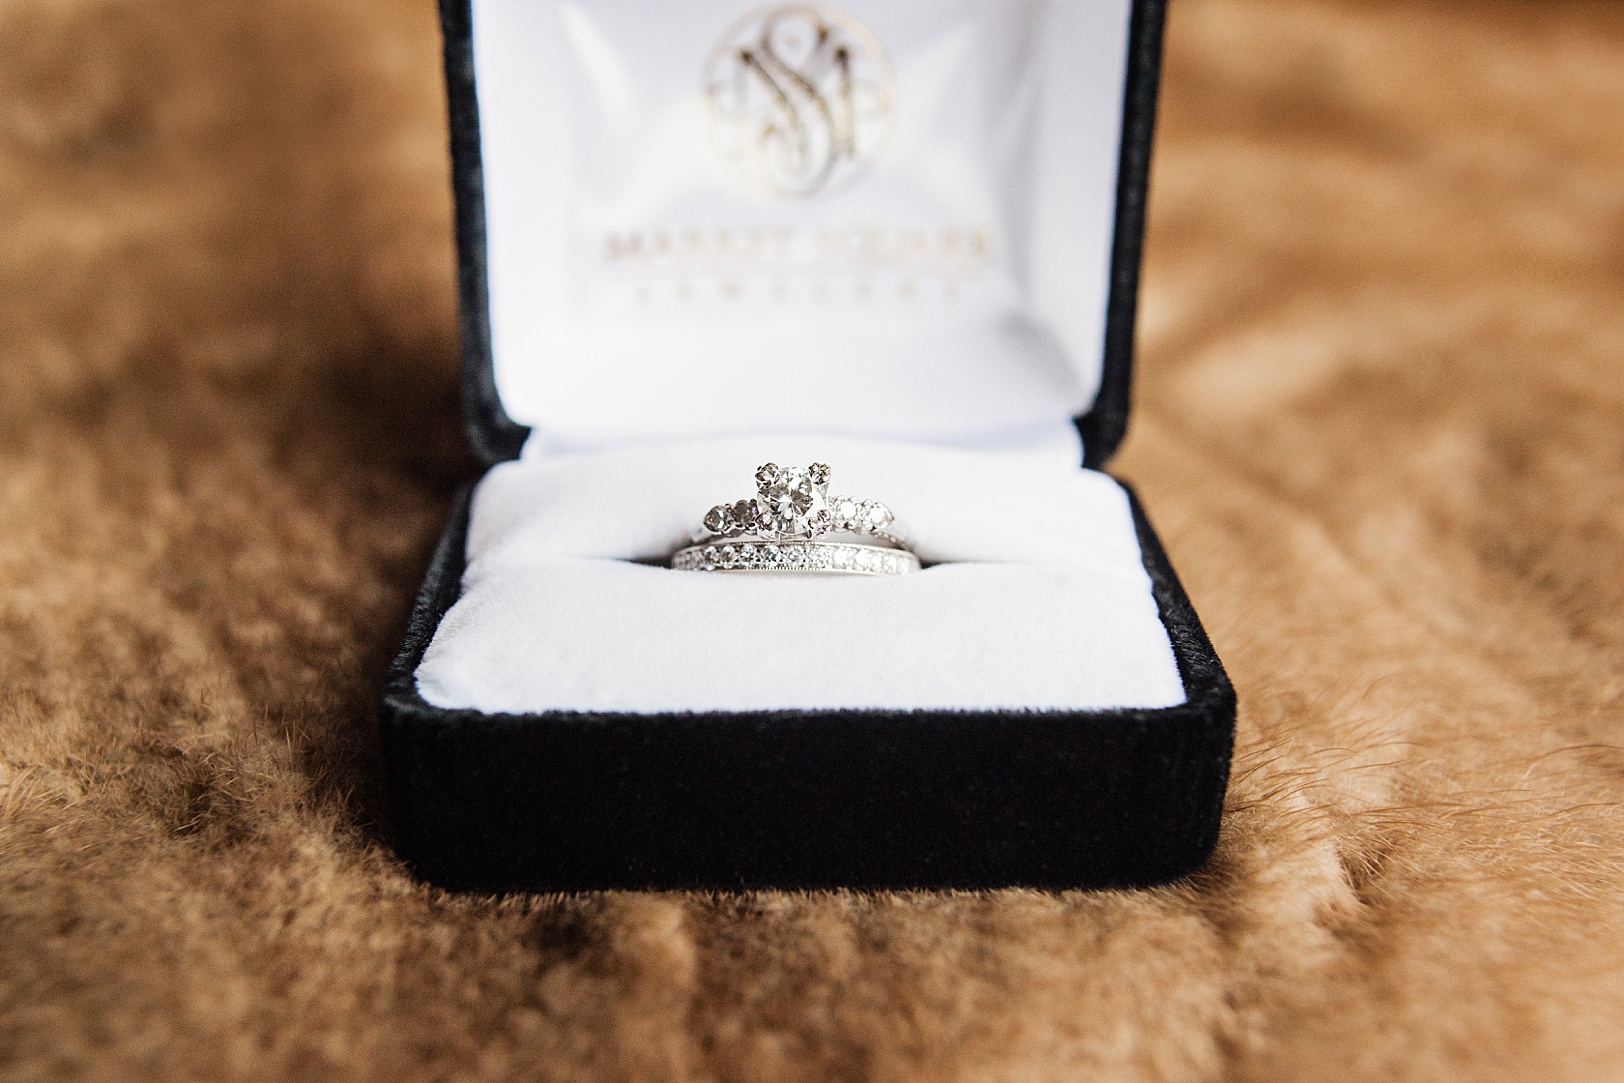 Engagement and Wedding Rings in box on fur | Kaitlin Scott Photography